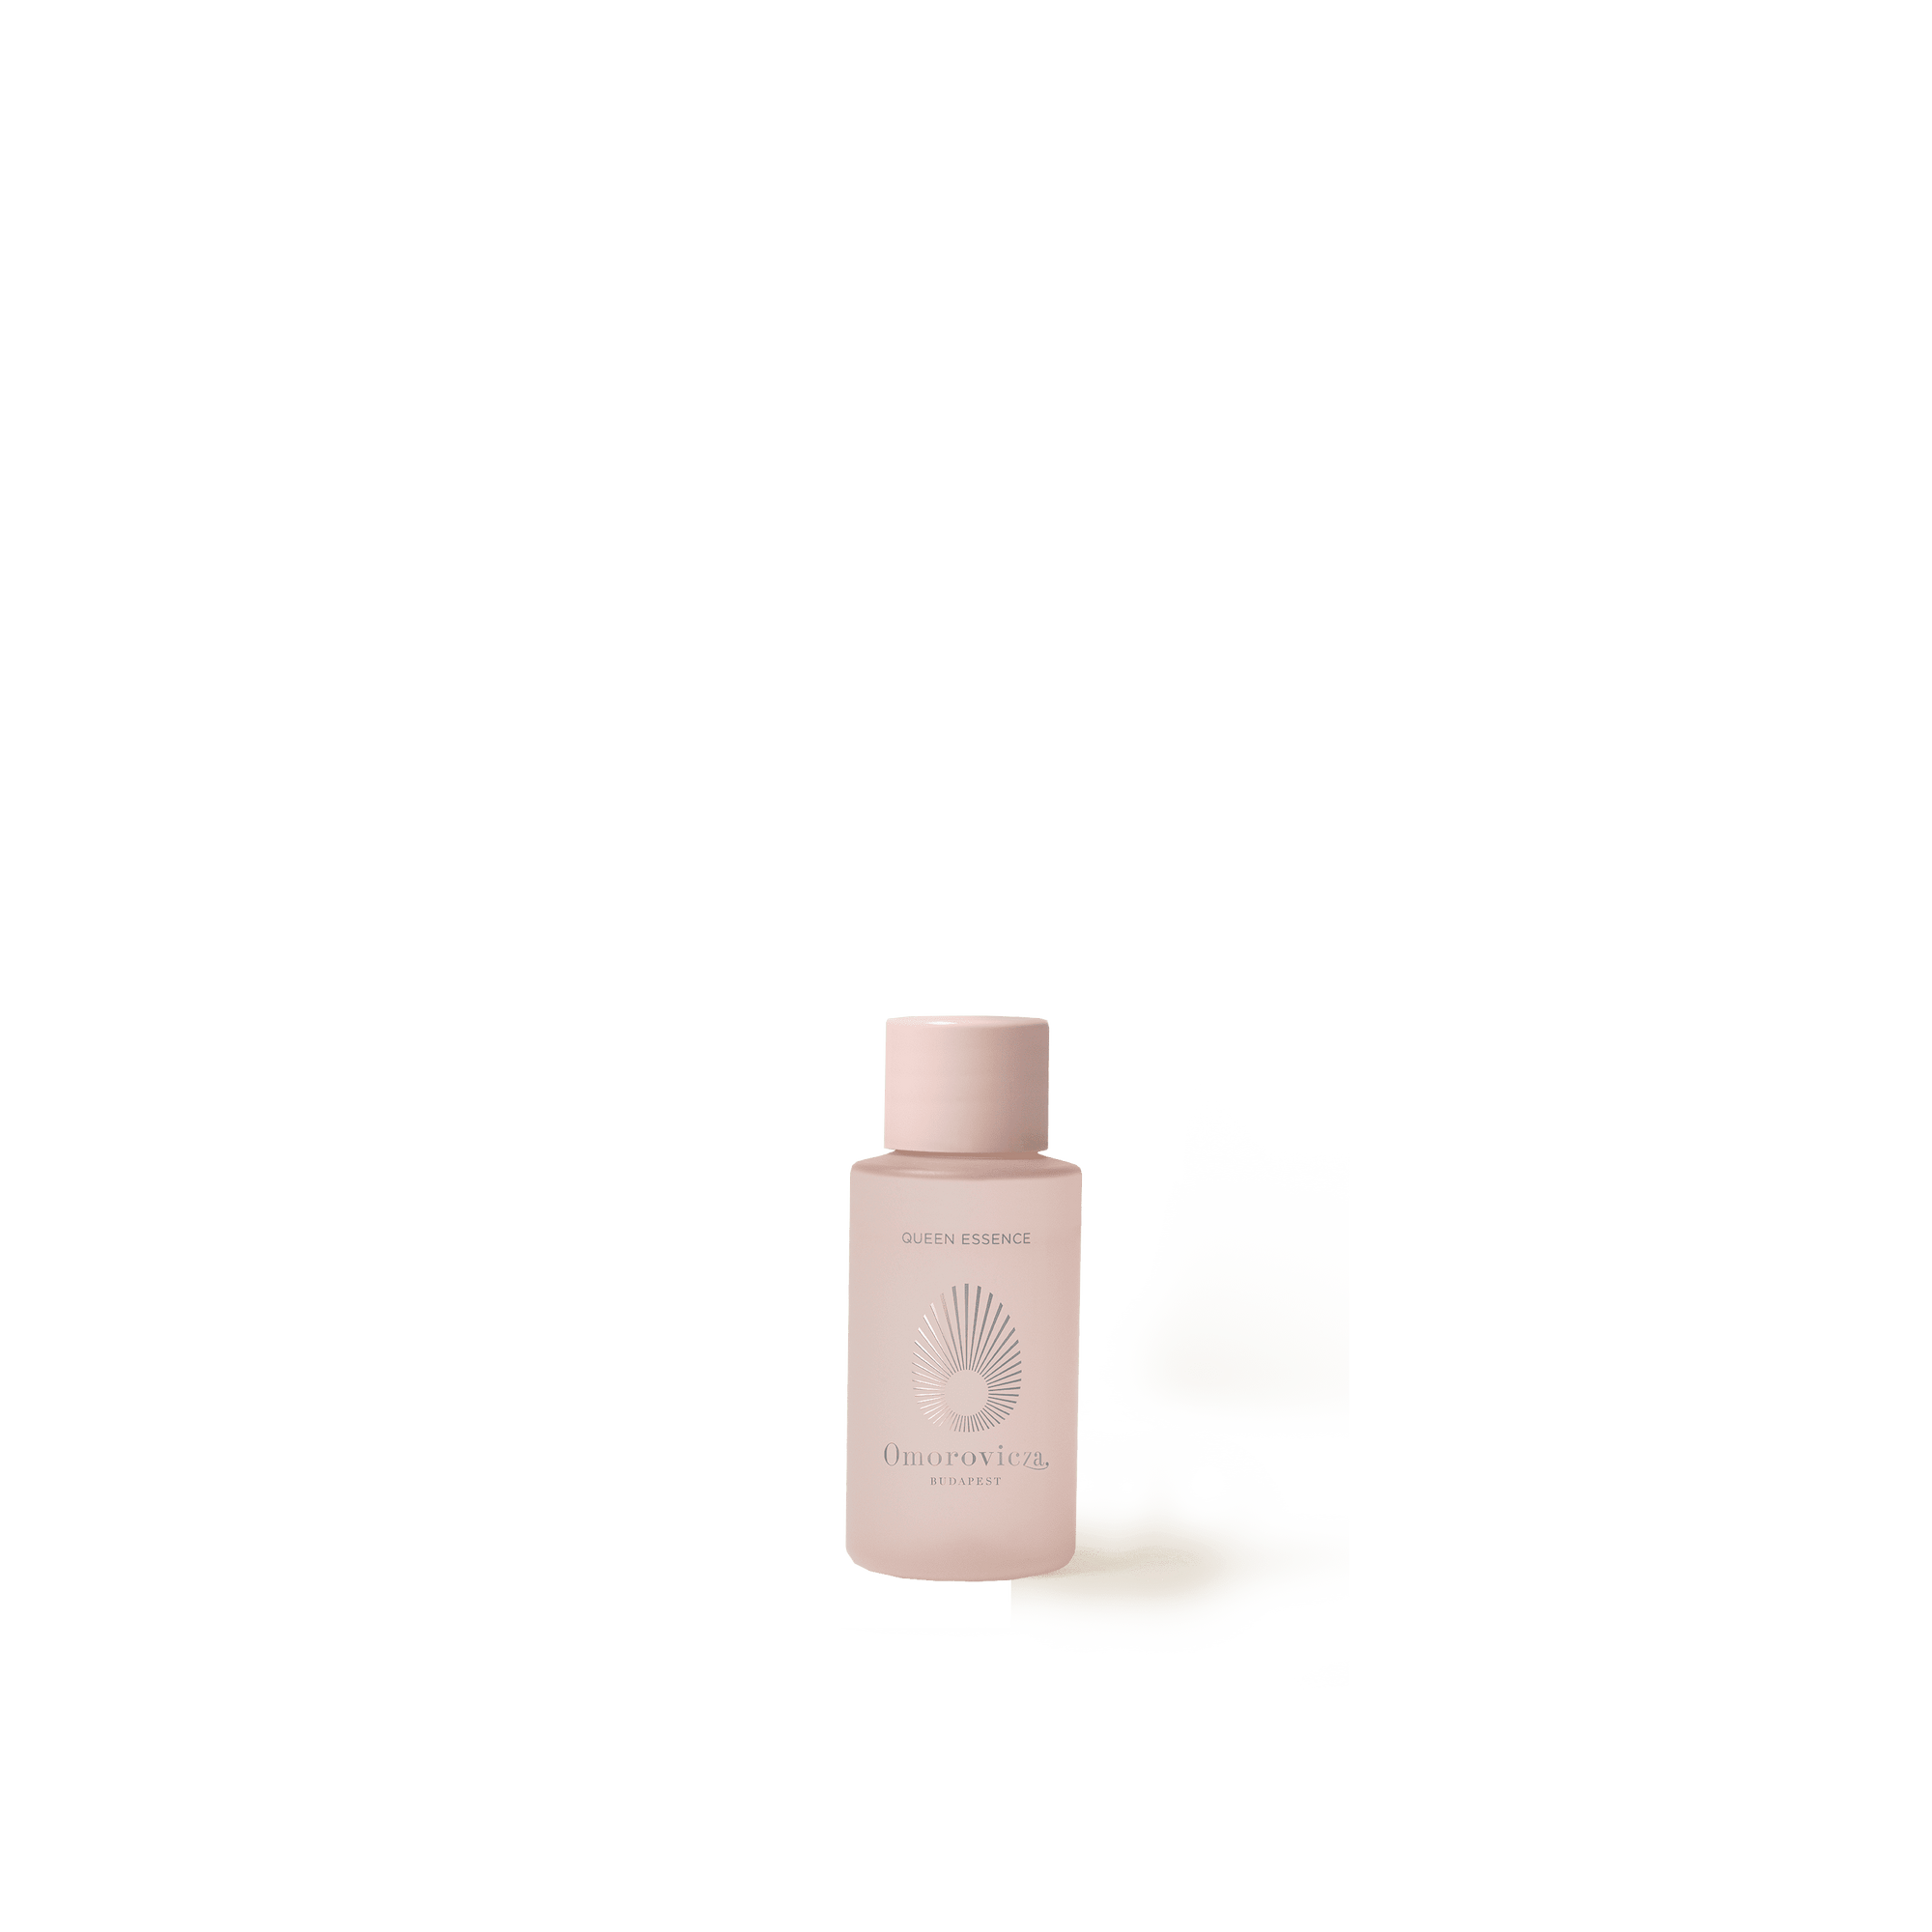 Travel size of Queen essence 30ml